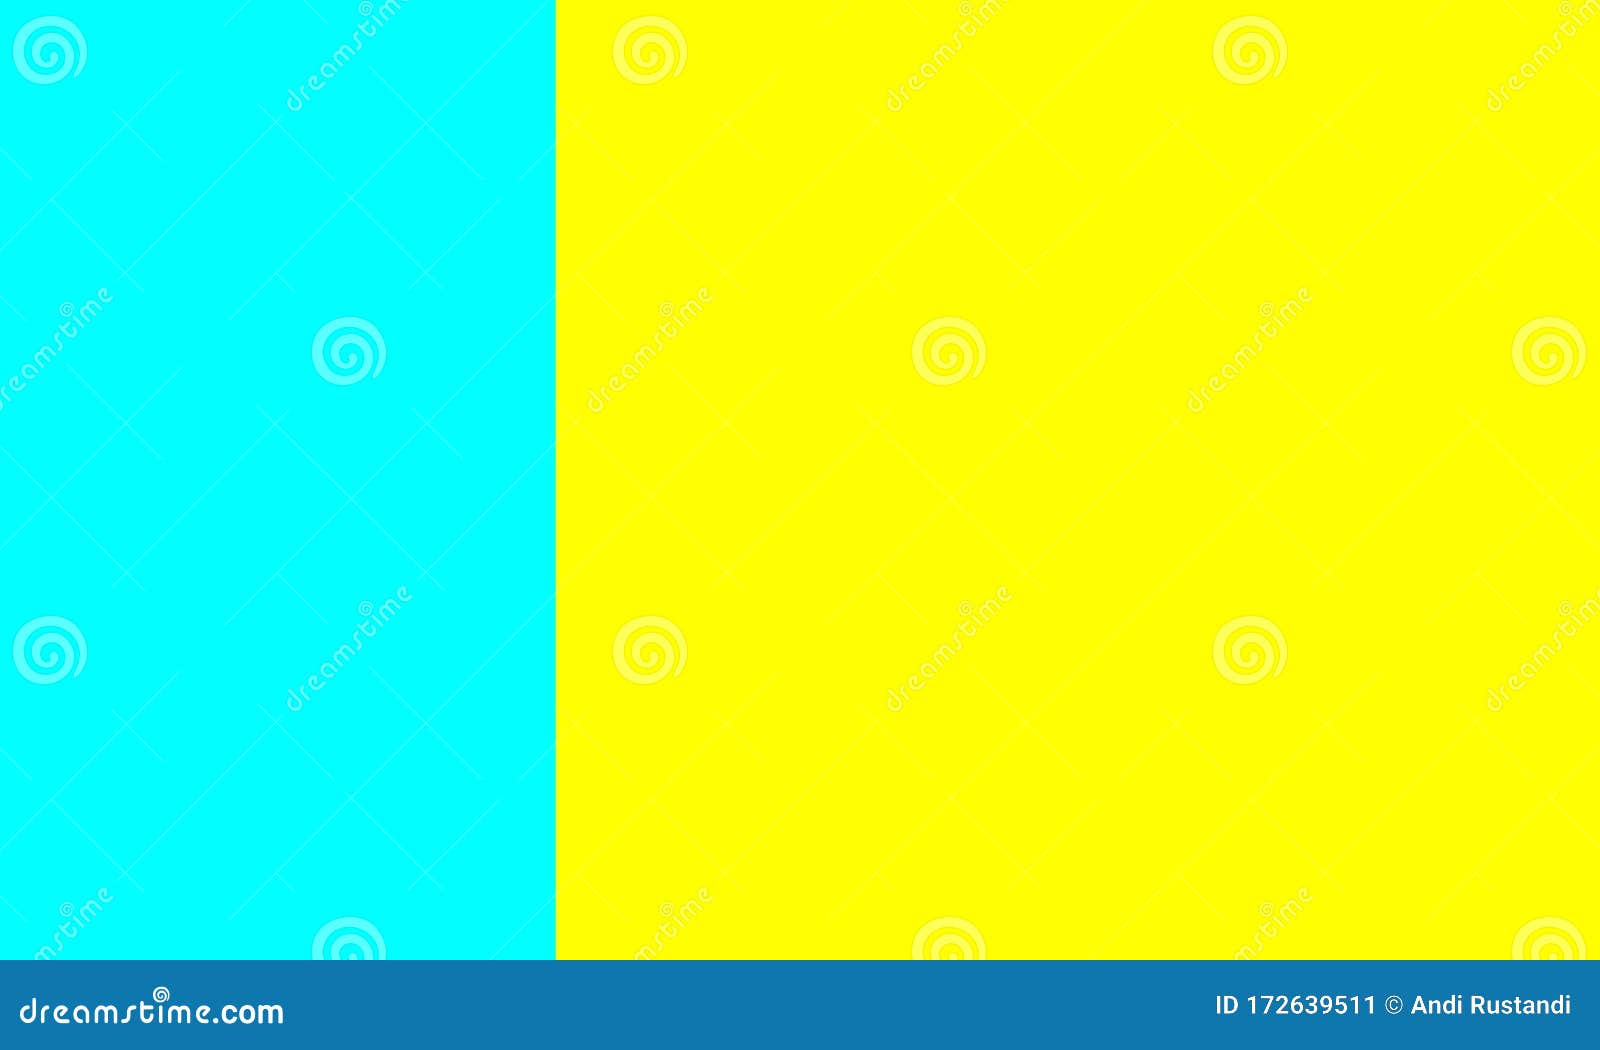 Simple Blue and Yellow Background Design Stock Vector - Illustration of  element, graphic: 172639511